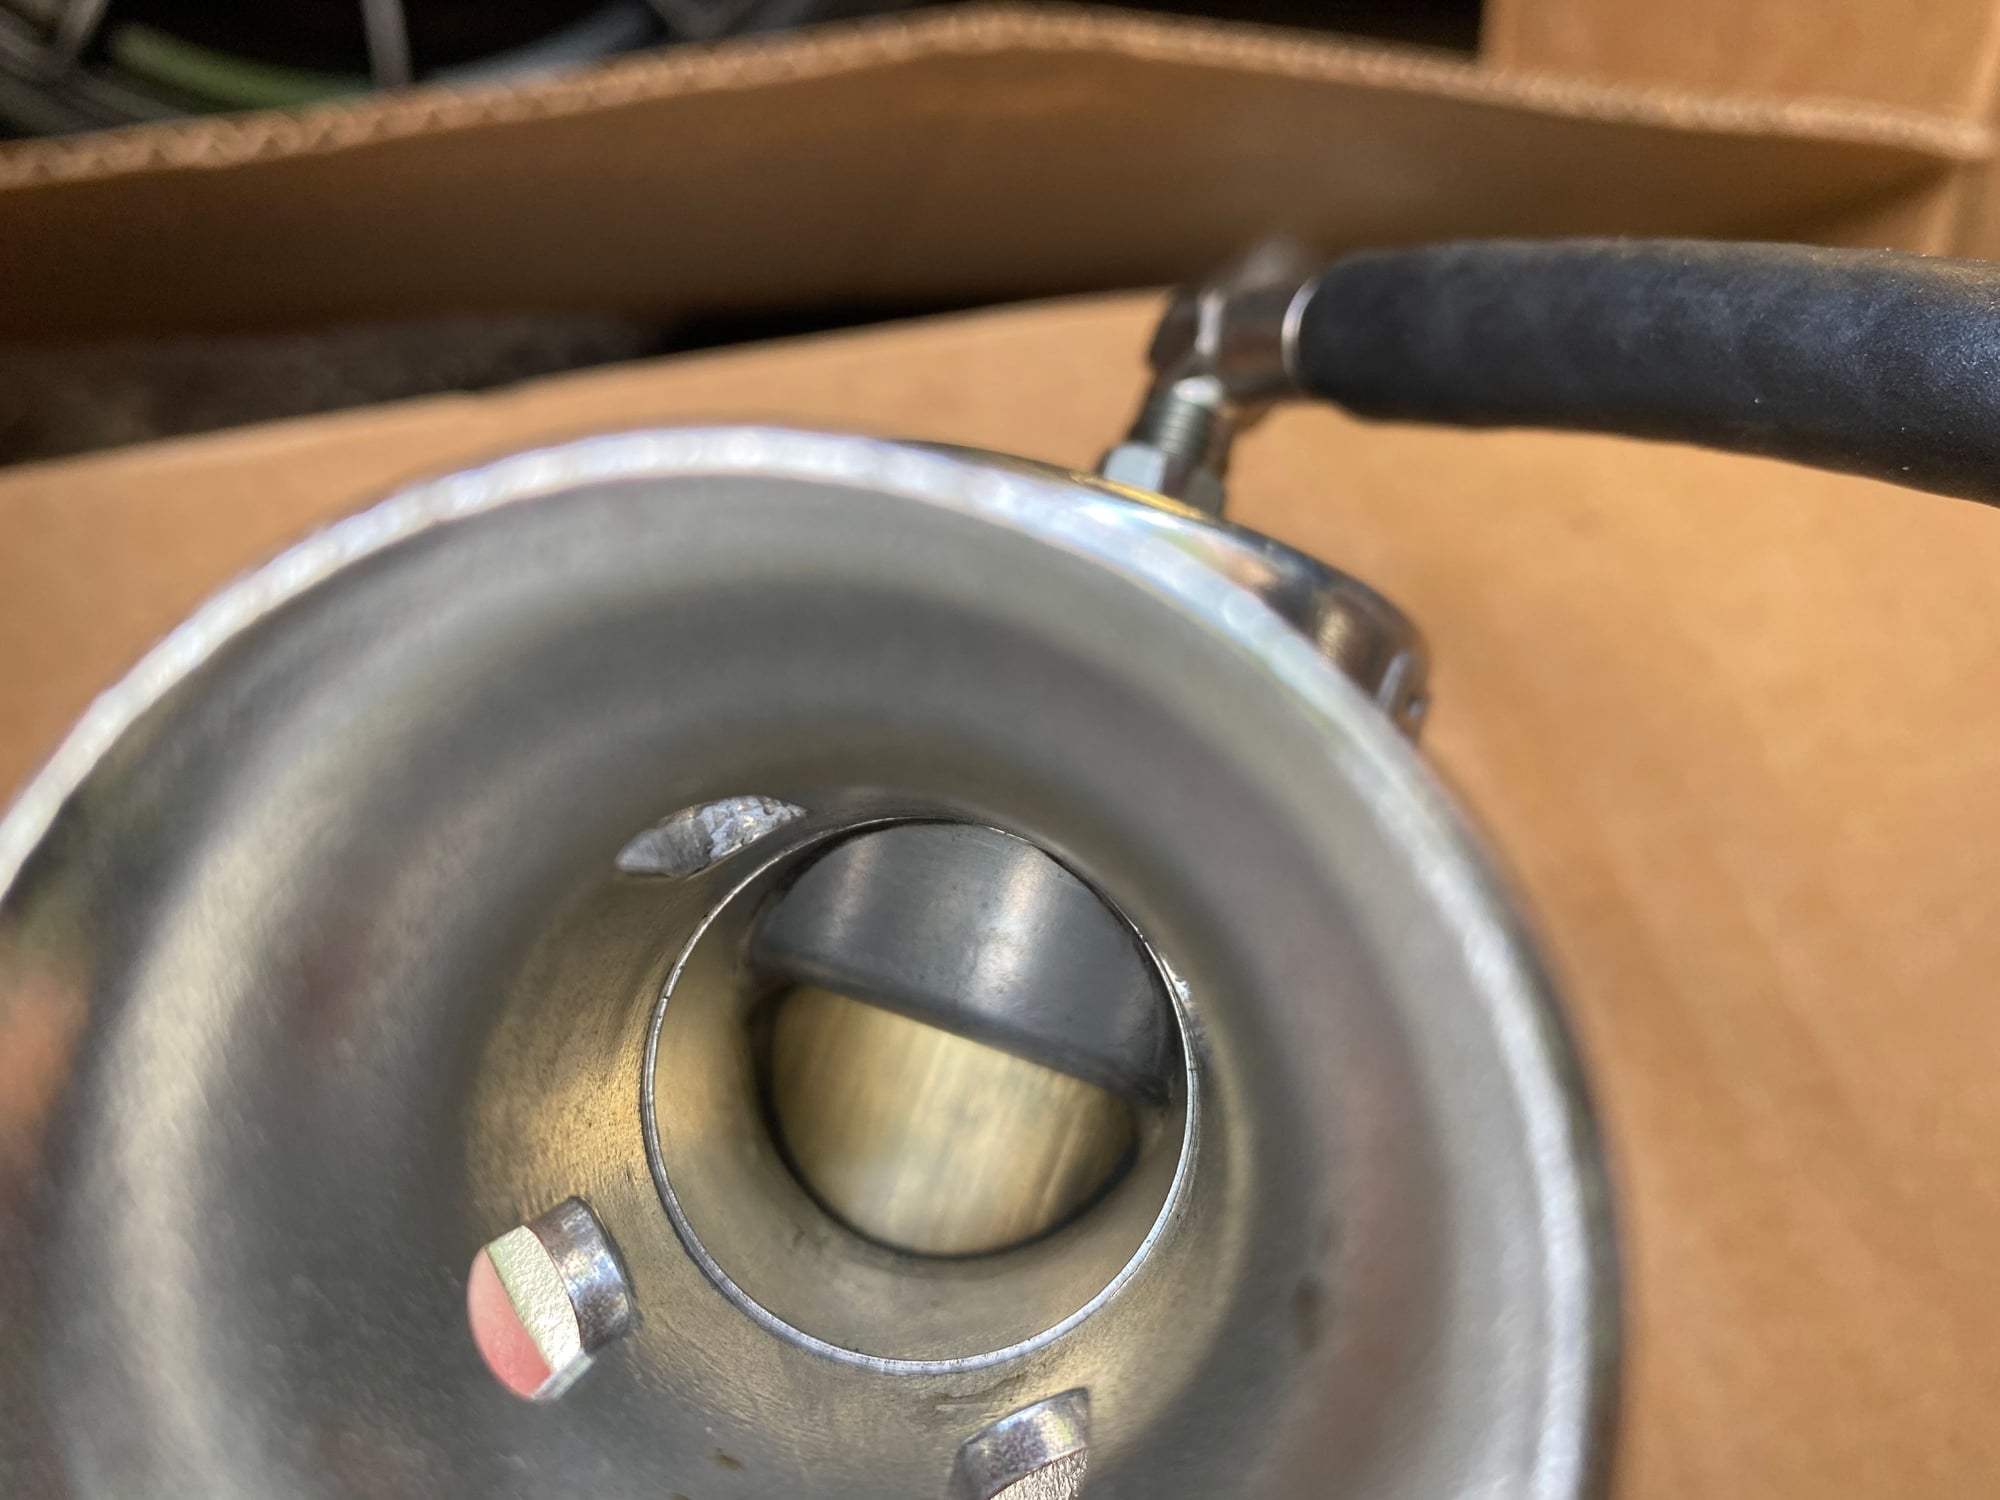 Miscellaneous - Authentic Blitz BOv very clean excellent condition old School JDM - Used - 1986 to 1991 Mazda RX-7 - Prince Frederick, MD 20678, United States